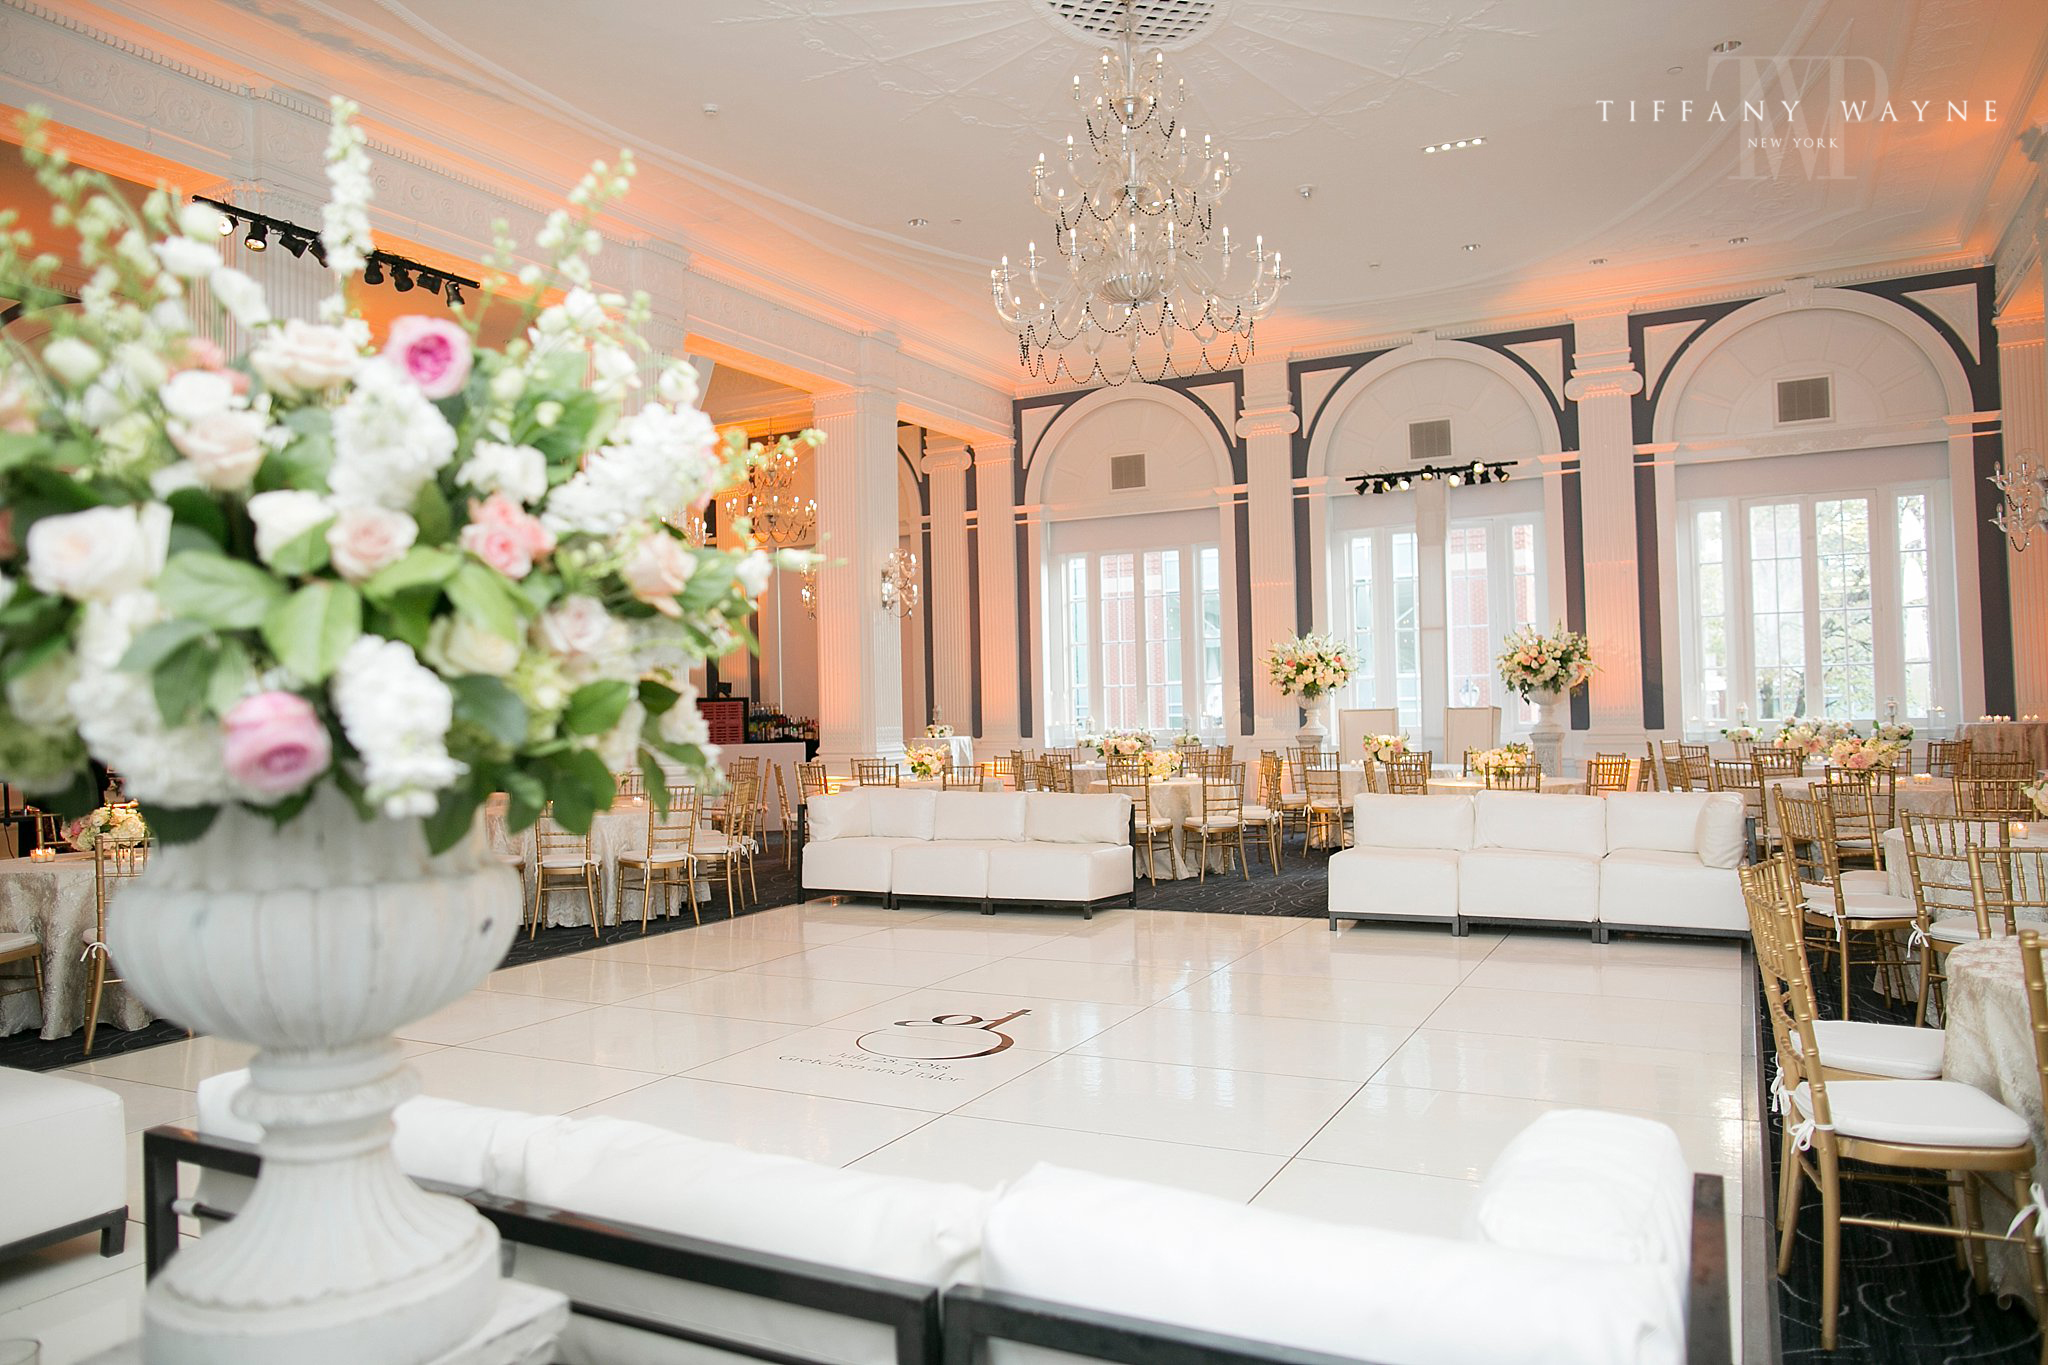 upscale wedding reception designed by Bisou Wedding & Events photographed by Tiffany Wayne Photography